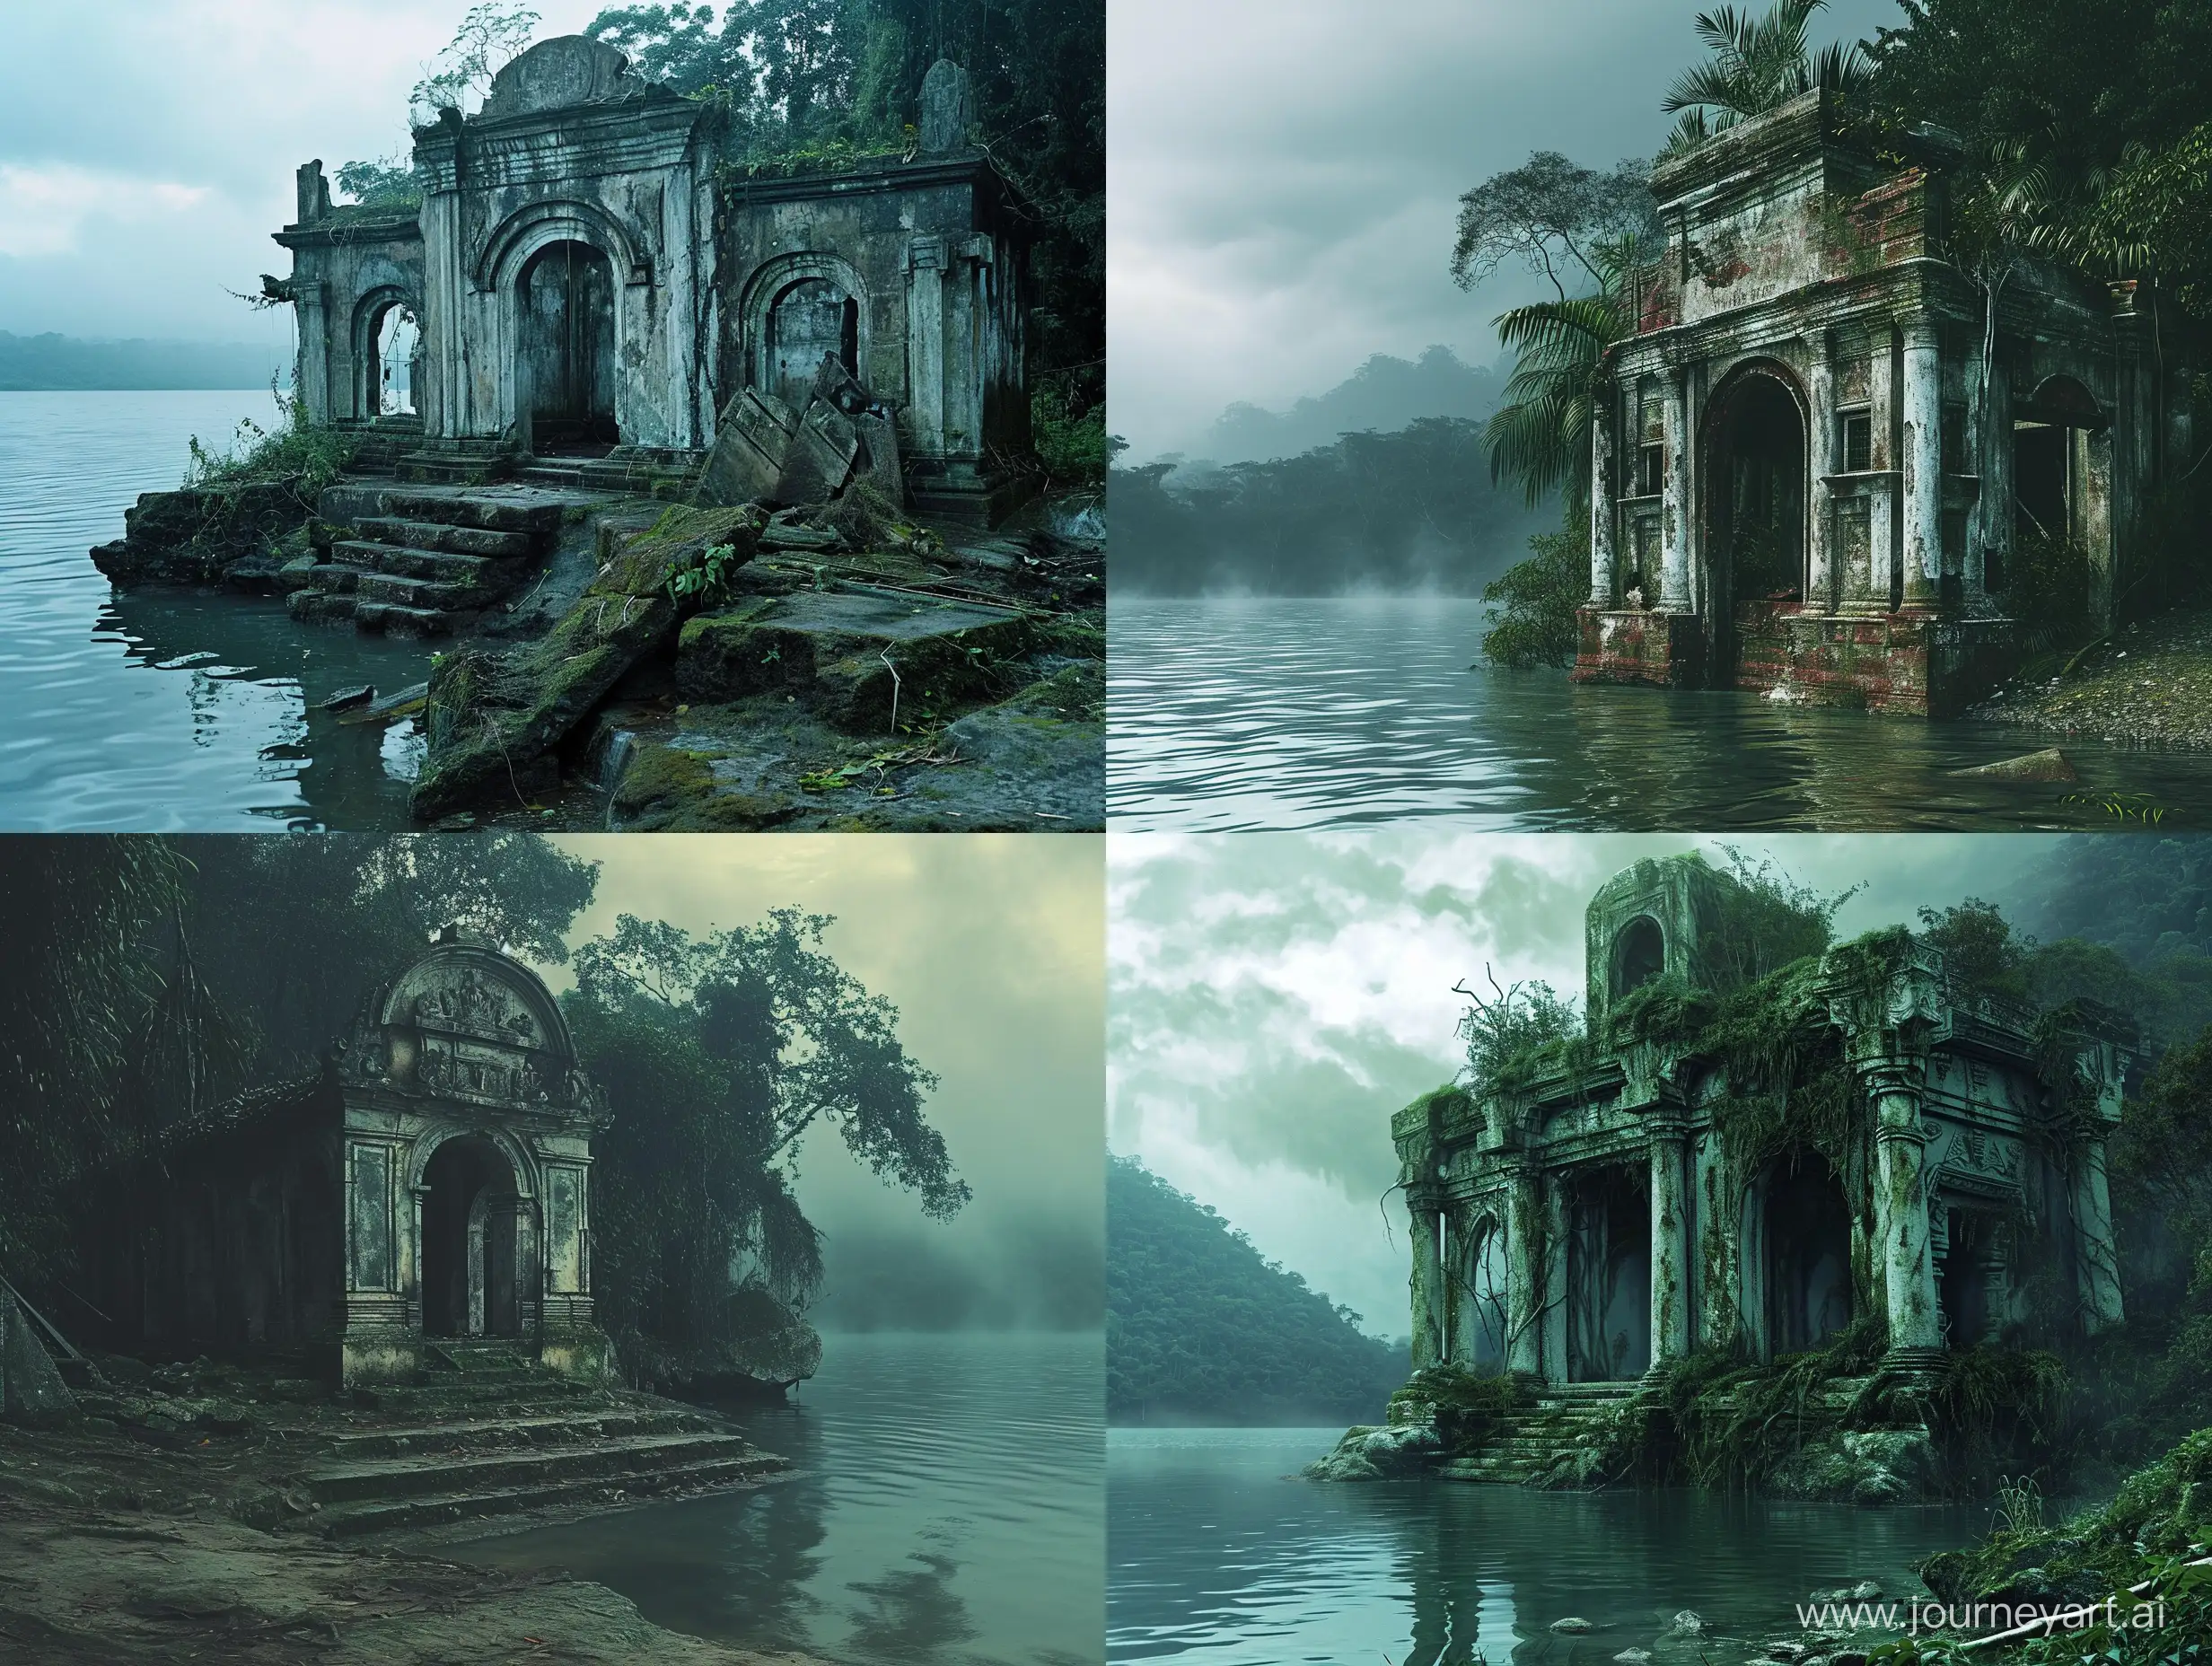 Eerie-HalfRuined-Pagan-Temple-by-the-Jungle-Lake